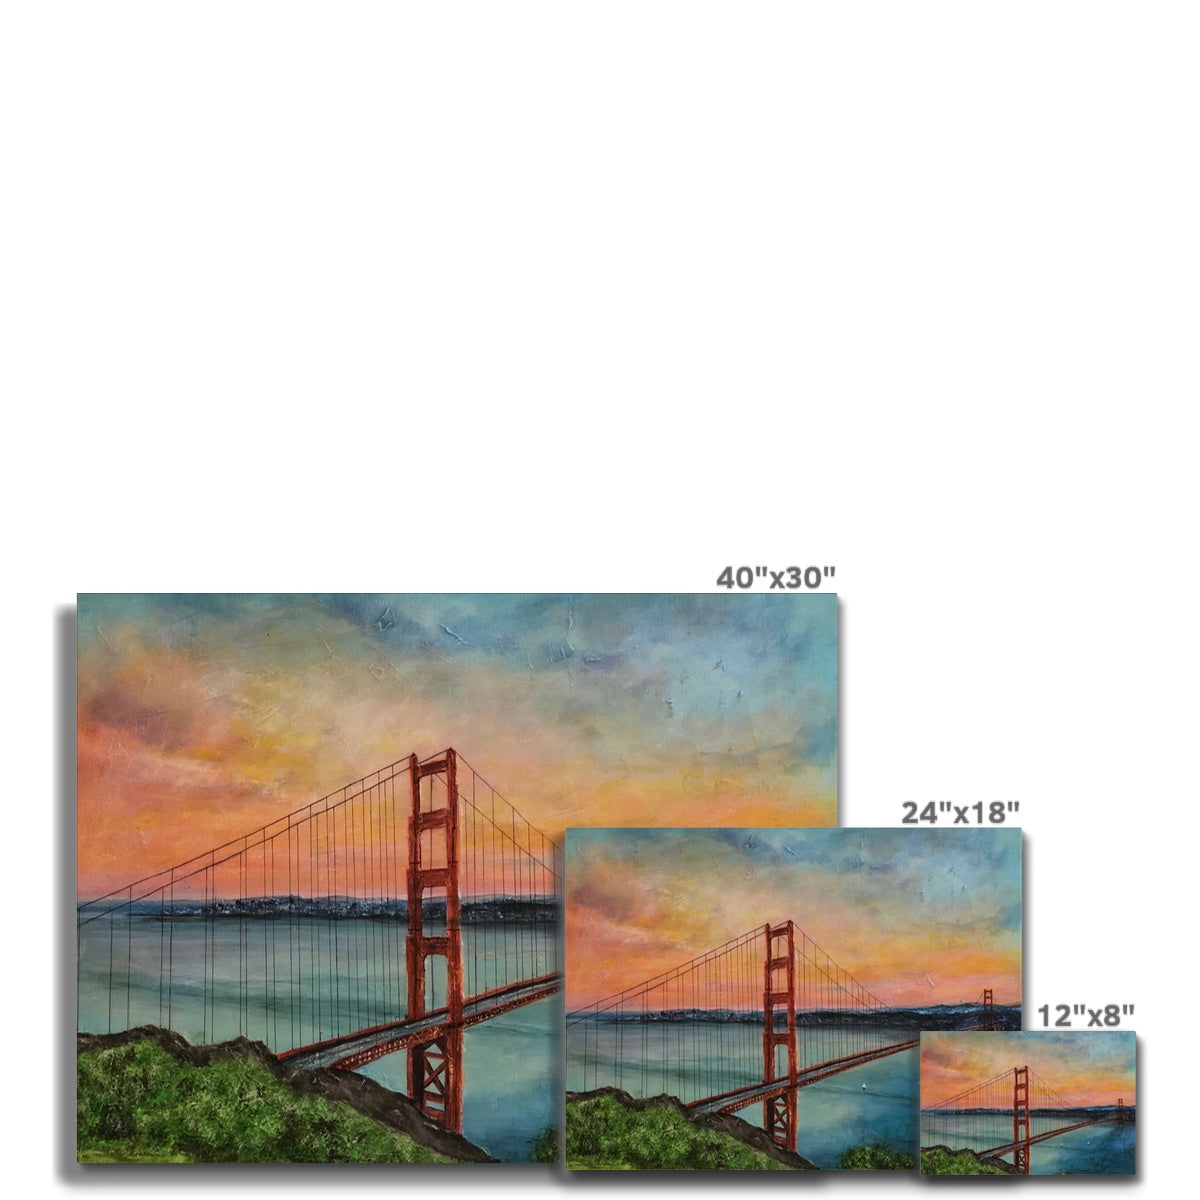 The Golden Gate Bridge Painting | Canvas From Scotland-Contemporary Stretched Canvas Prints-World Art Gallery-Paintings, Prints, Homeware, Art Gifts From Scotland By Scottish Artist Kevin Hunter